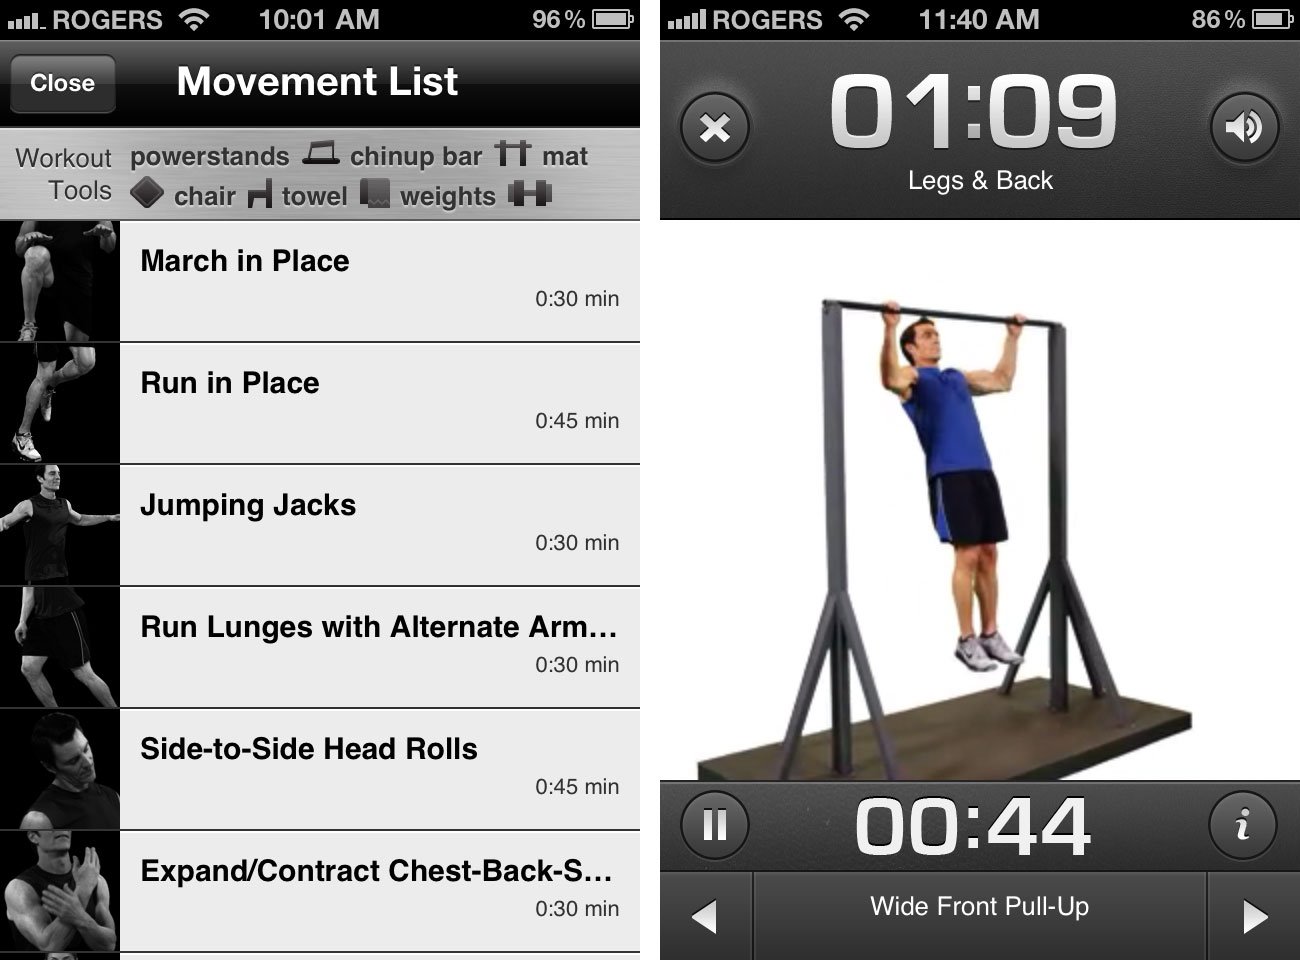 With P90X for iPhone, you can use it as a companion for the DVDs (or your existing exercise knowledge), or buy video workouts via in-app purchase.